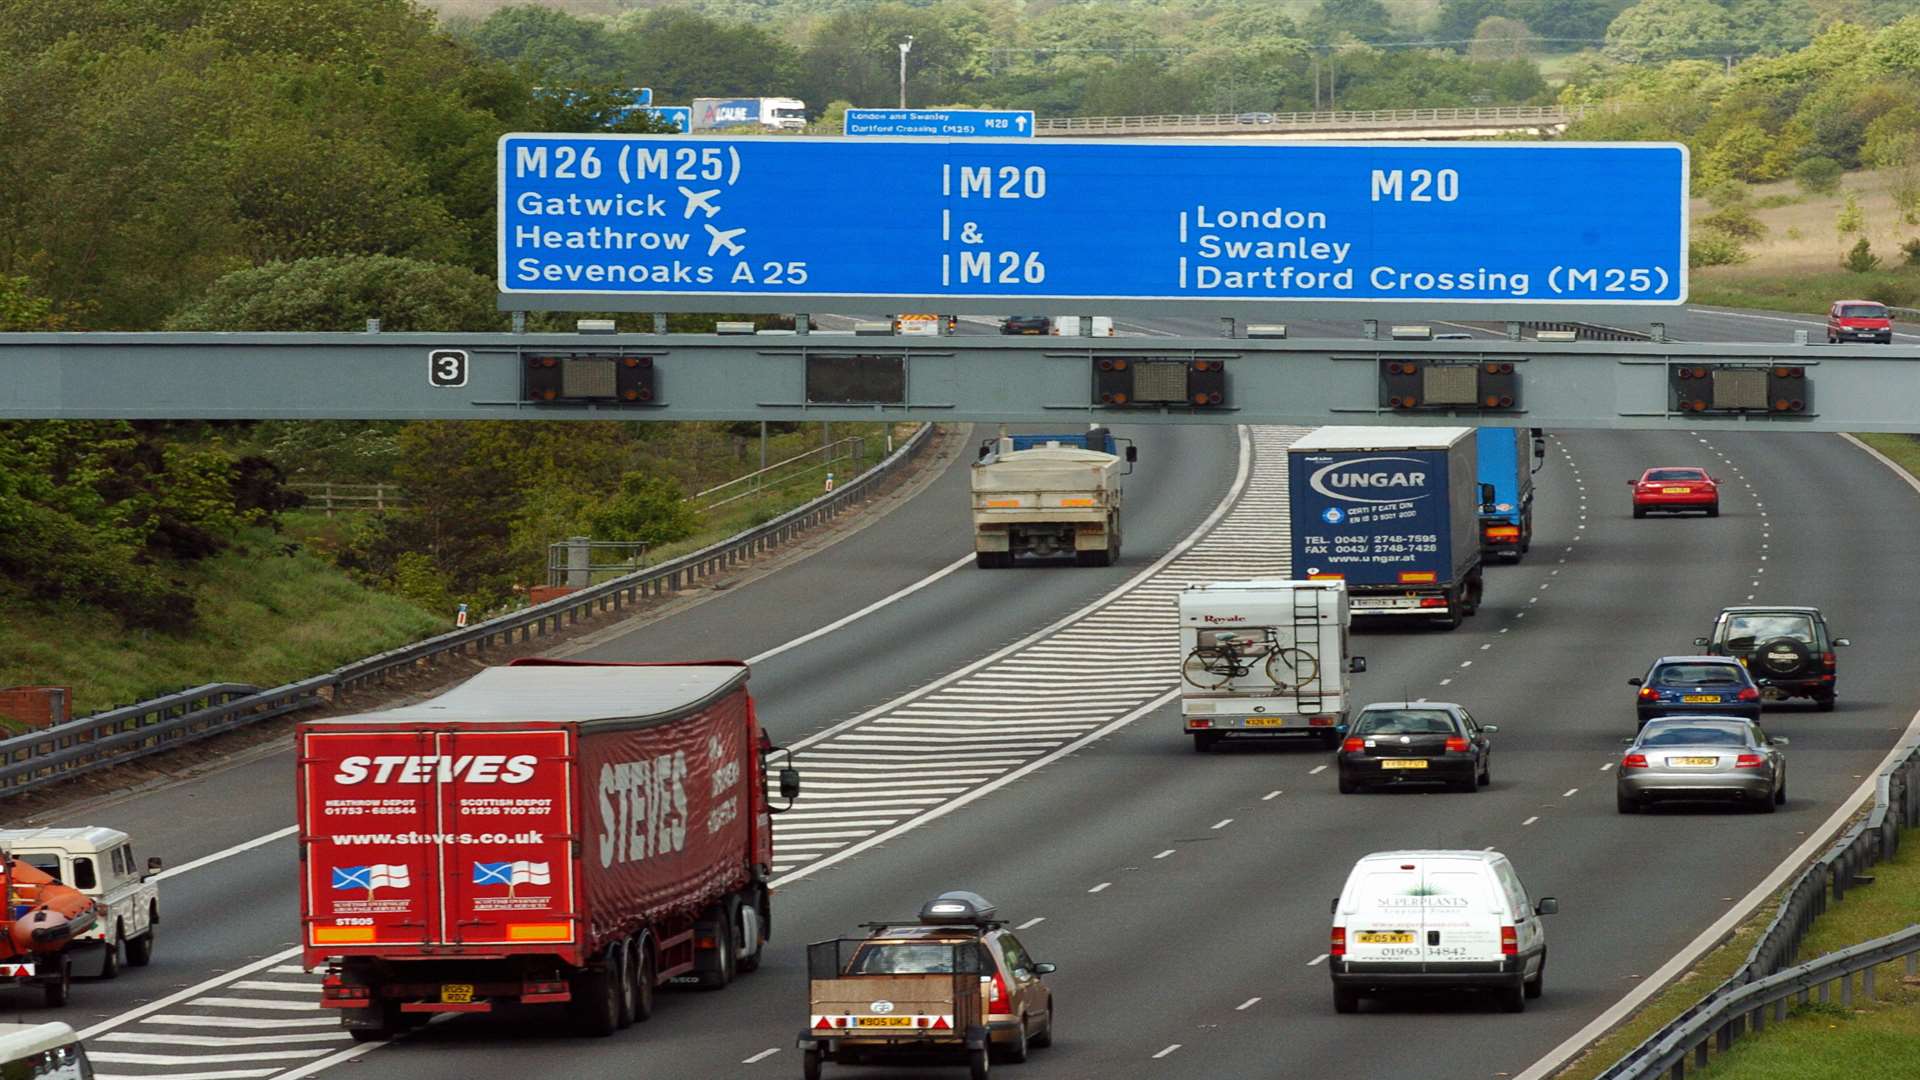 Junction 3 of the M20 the interchange with the M26 near Wrotham